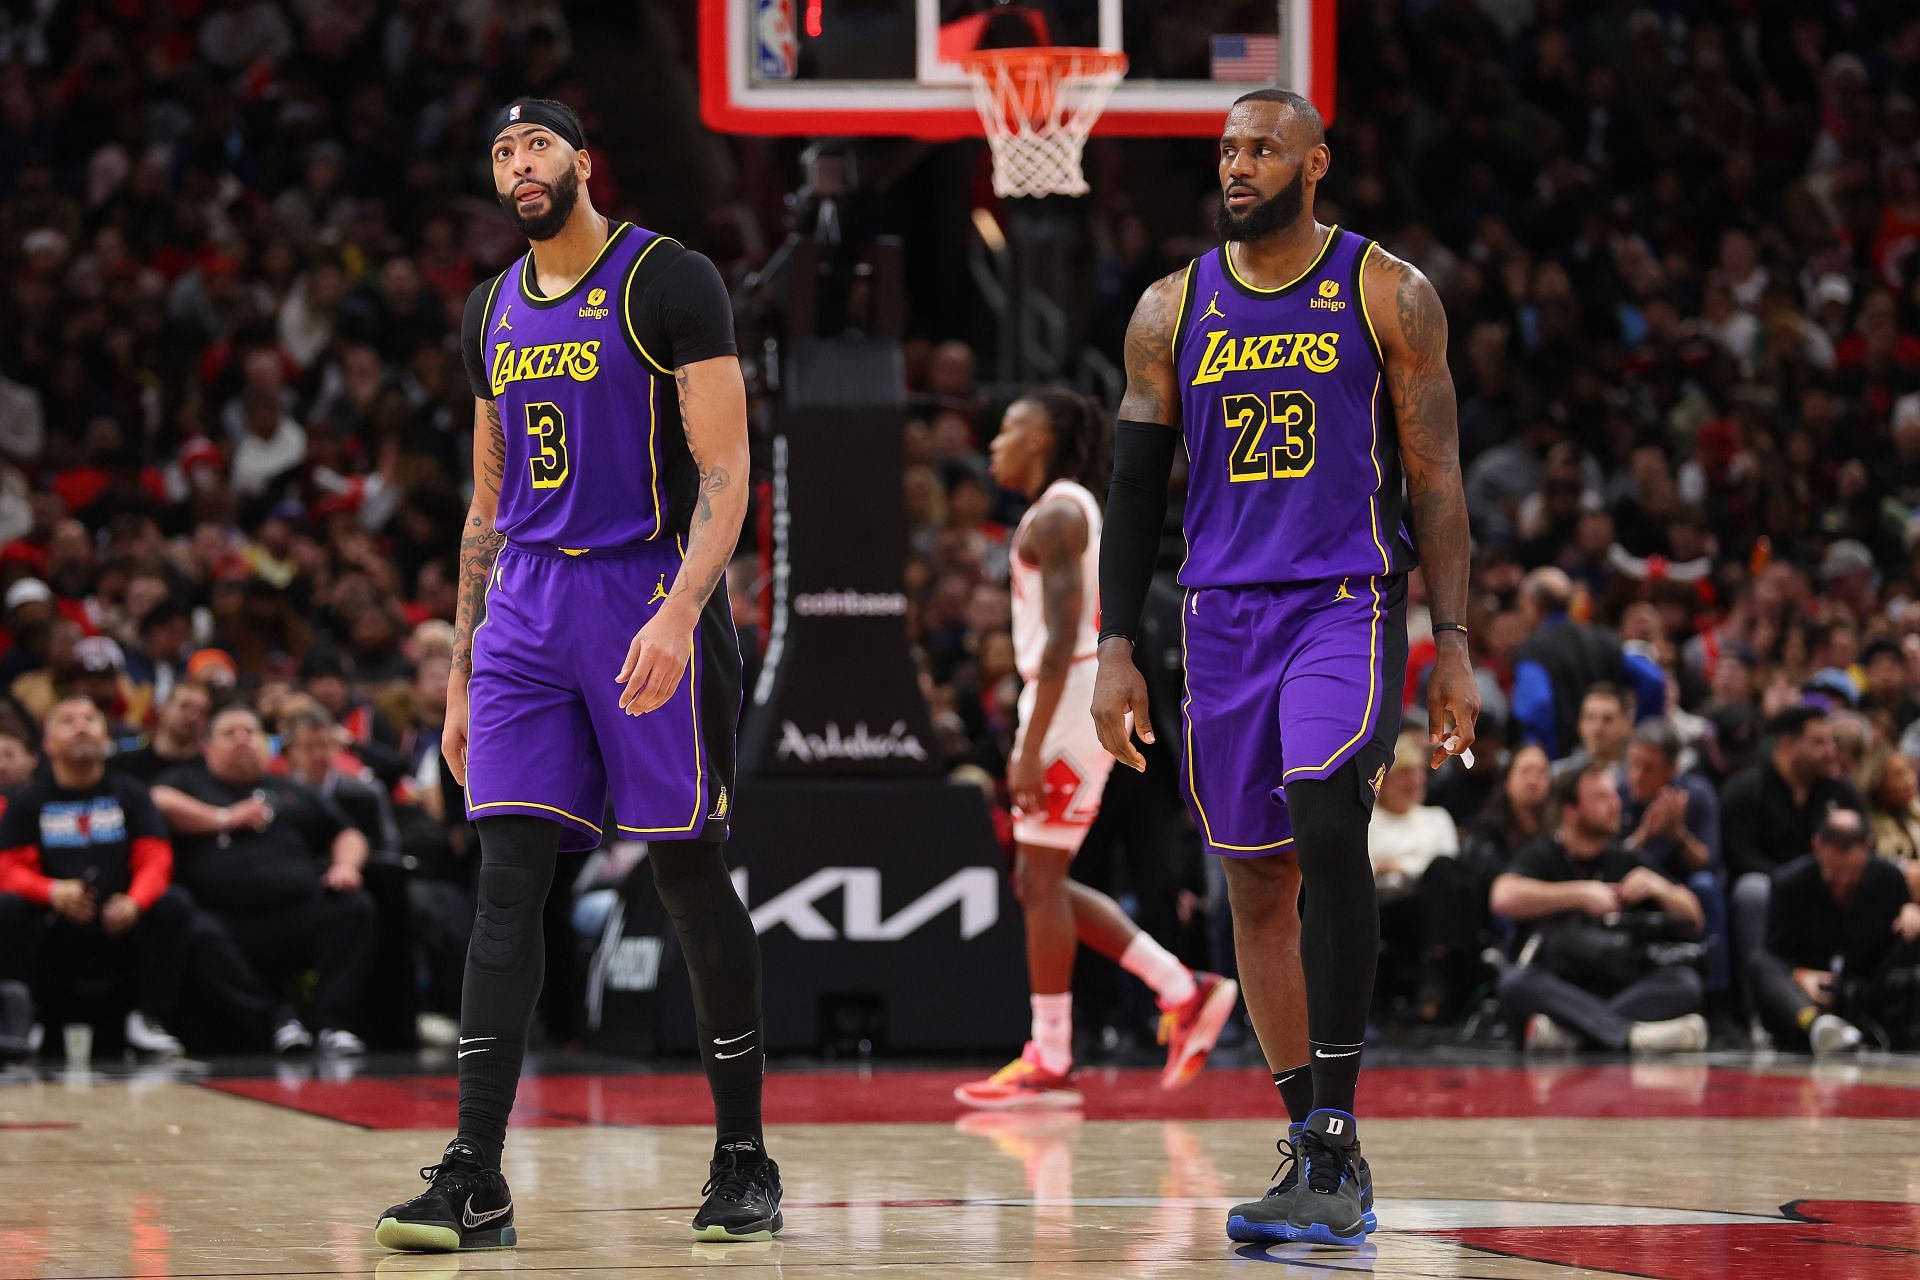 Predicting the results of the LA Lakers' next 5 games after 5game